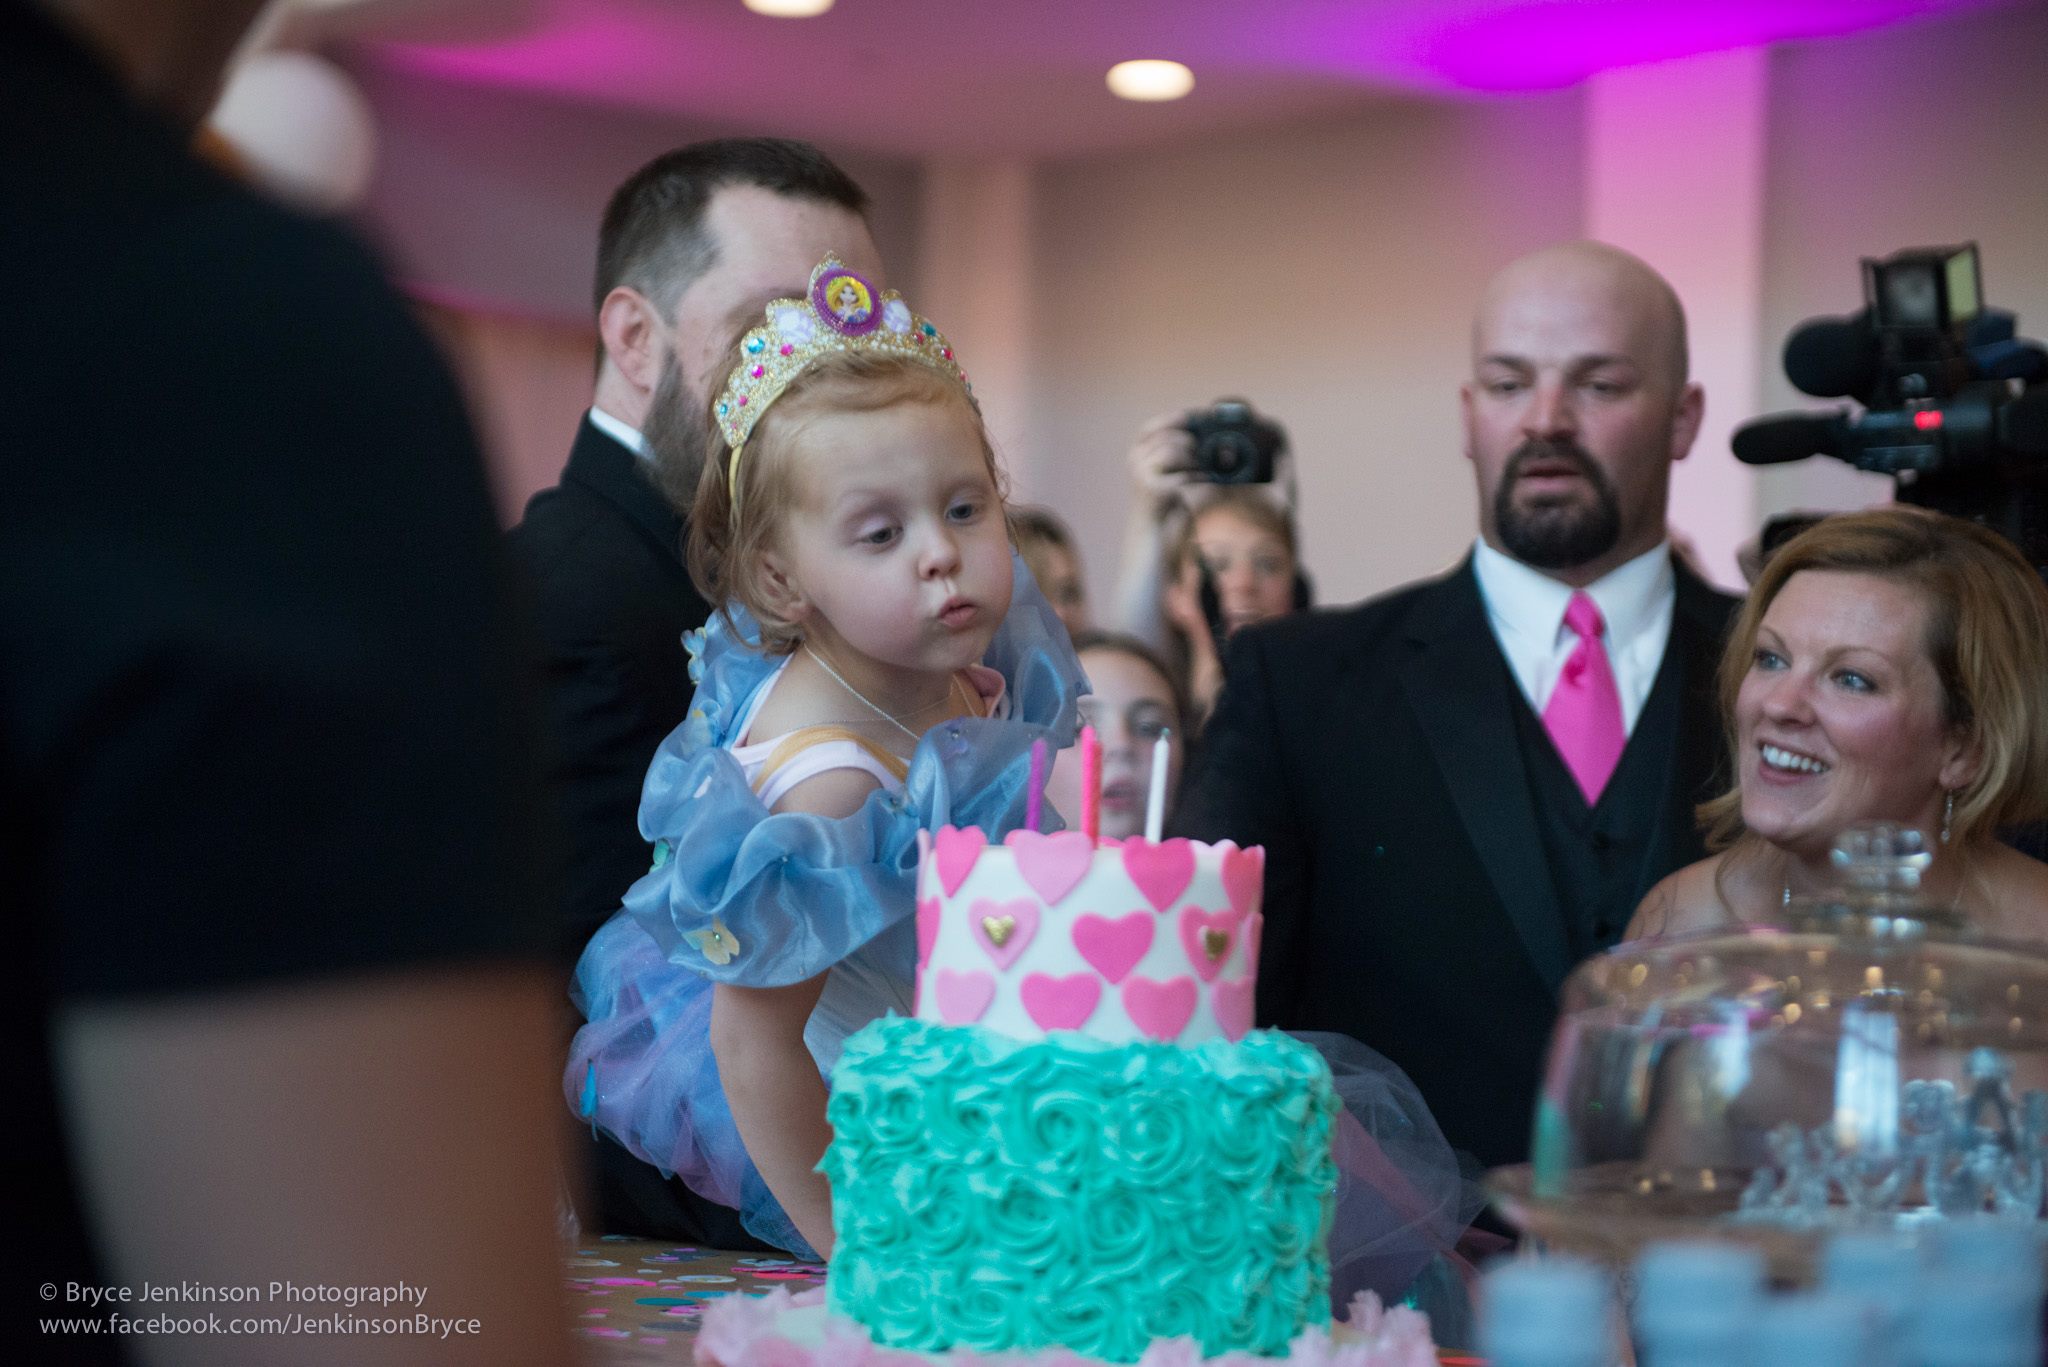 PHOTO: Girl with incurable cancer has blowout birthday party for 5th birthday. 
